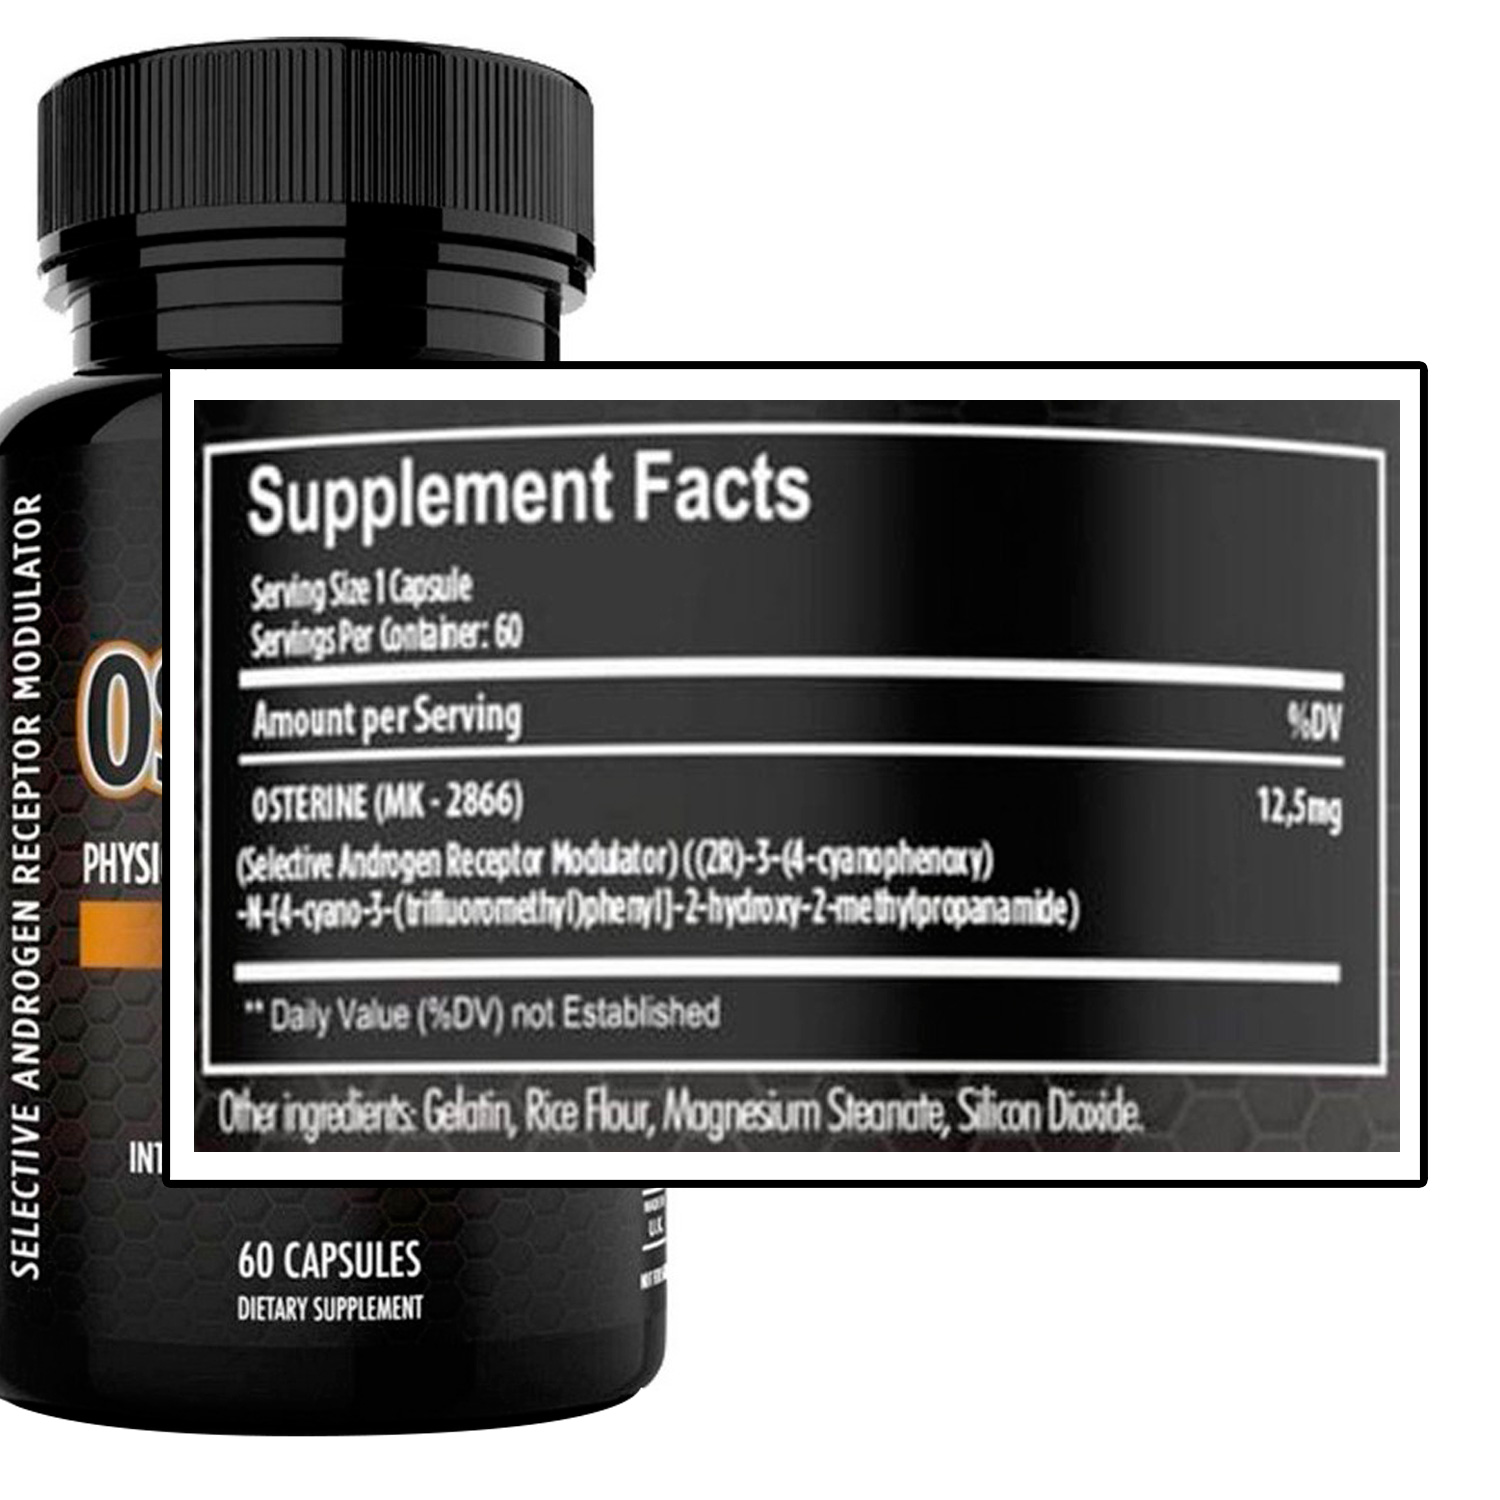 tabela_nutricional_osterine_researchlabs_home_muscle_suplementos